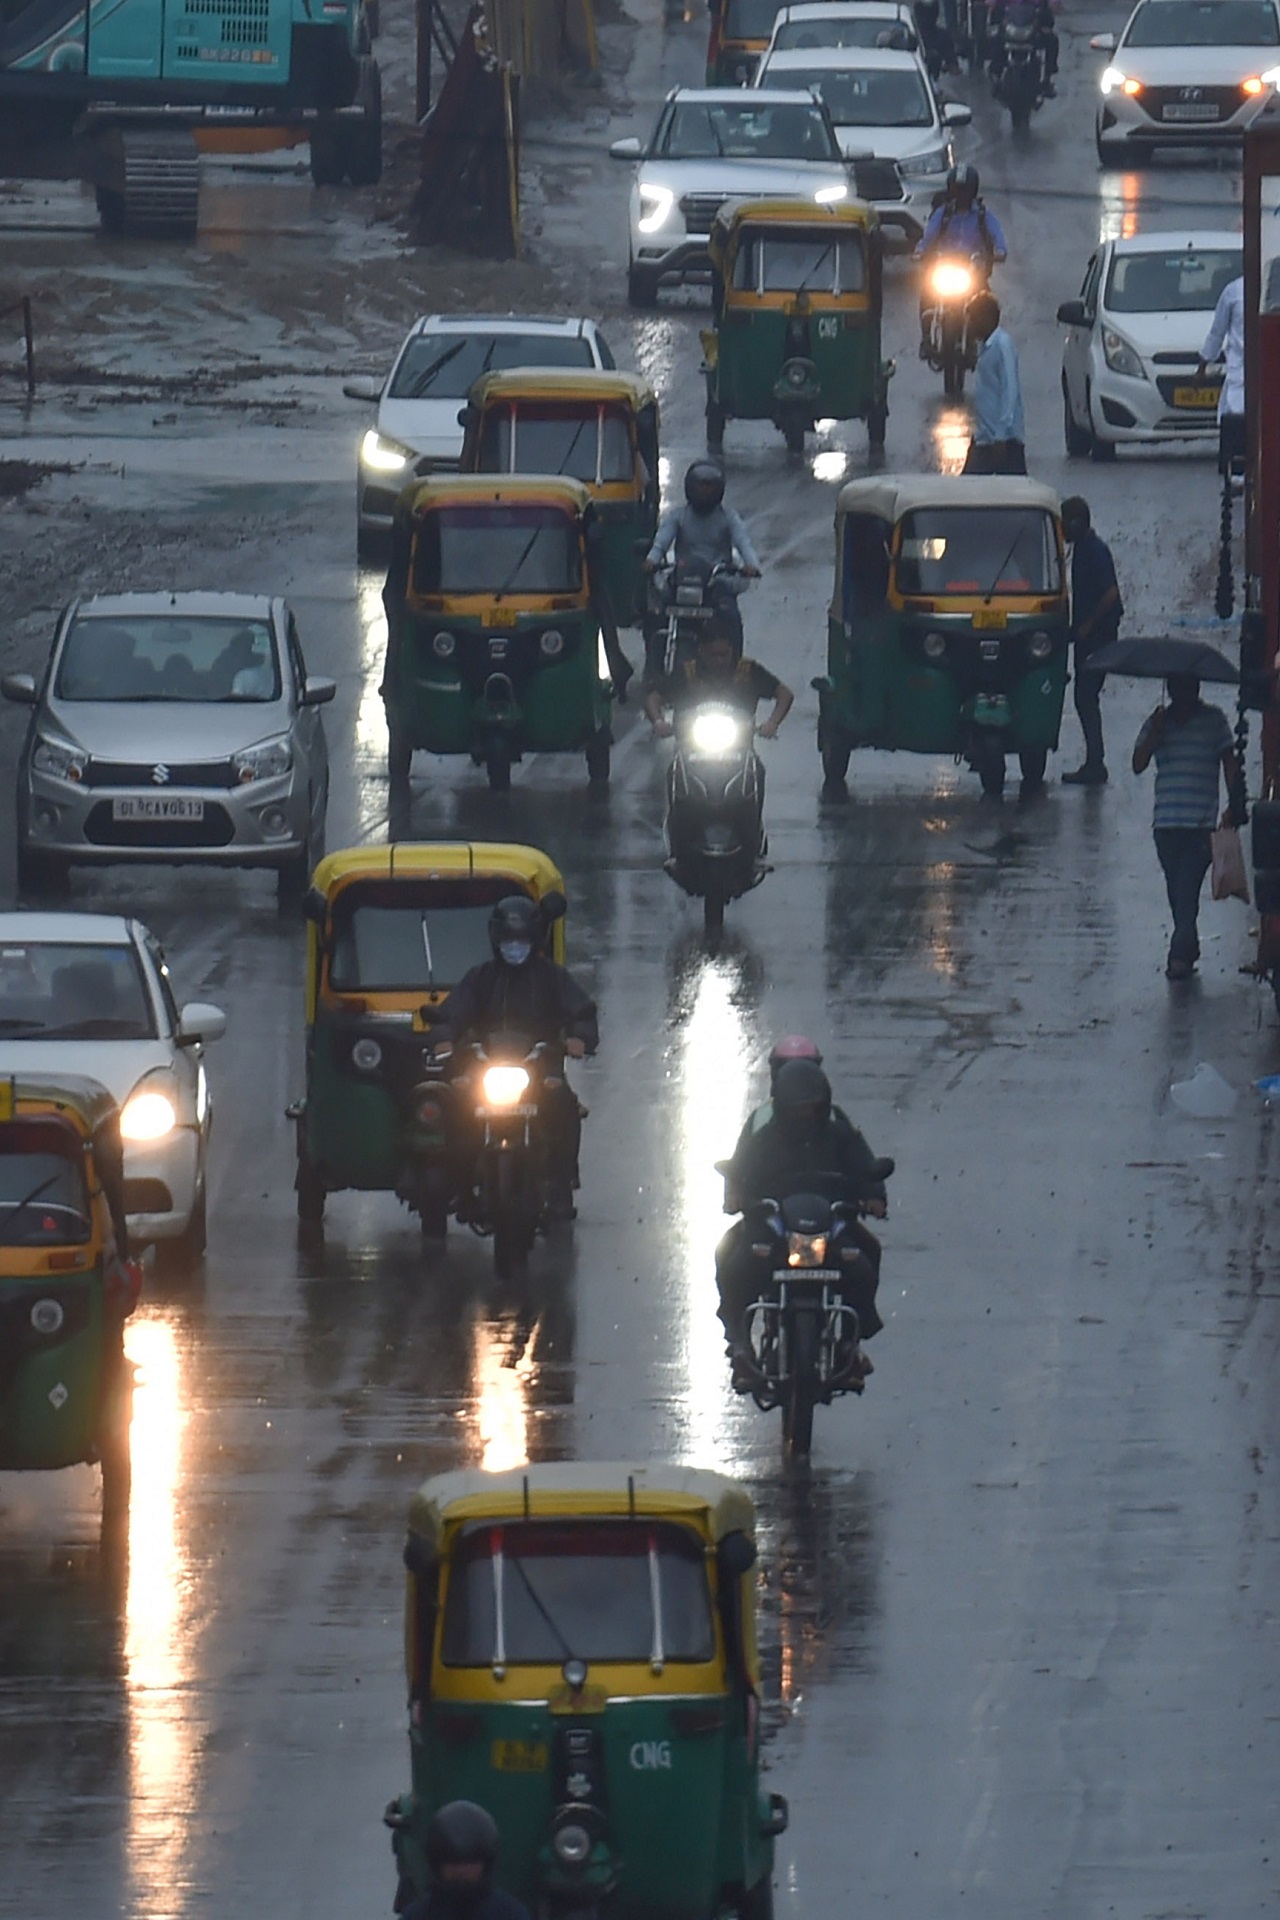 Delhiites, time to bring out the raincoats